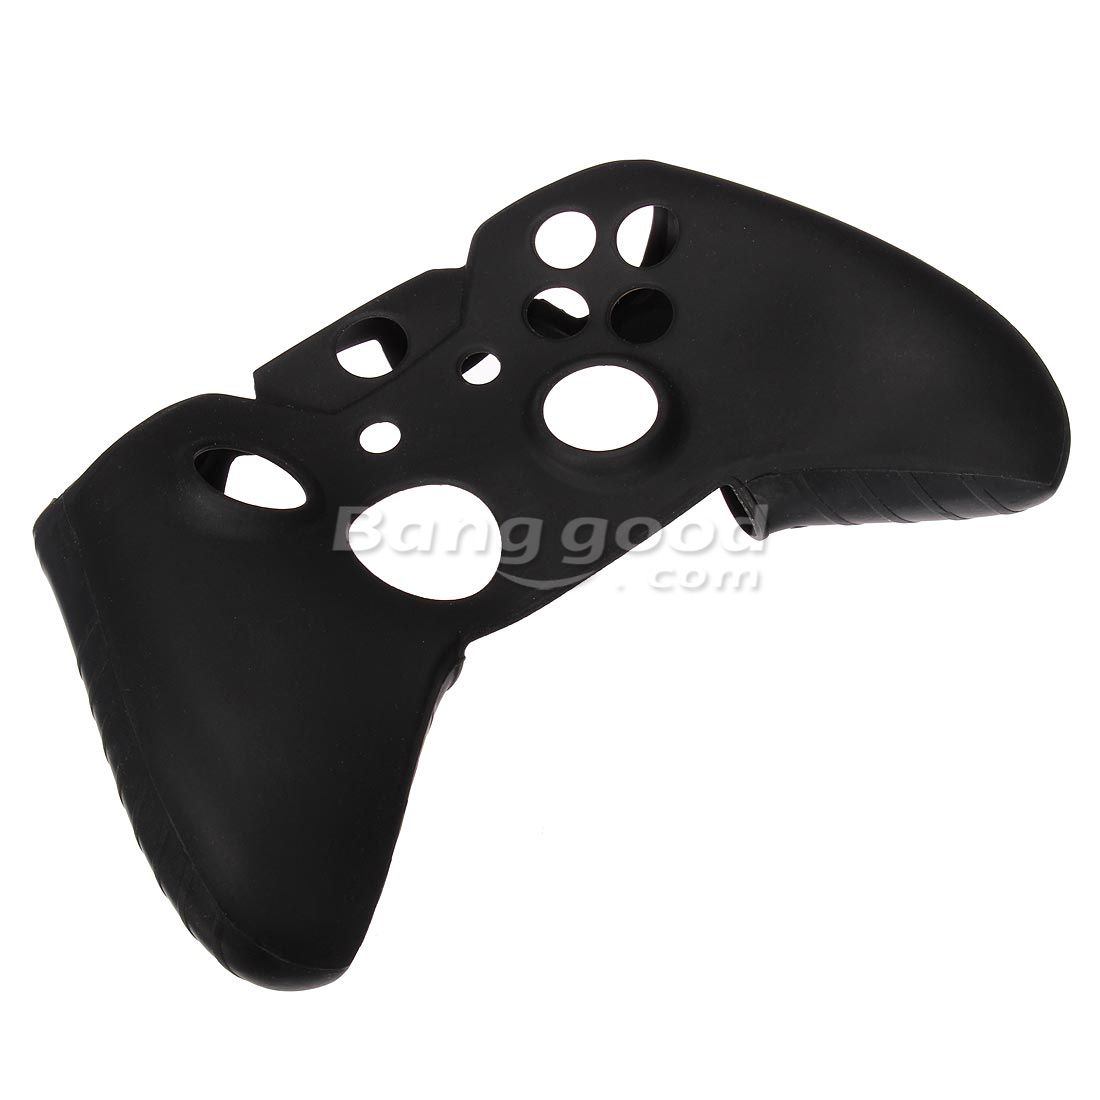 Durable Silicone Protective Case Cover For XBOX ONE Controller 16